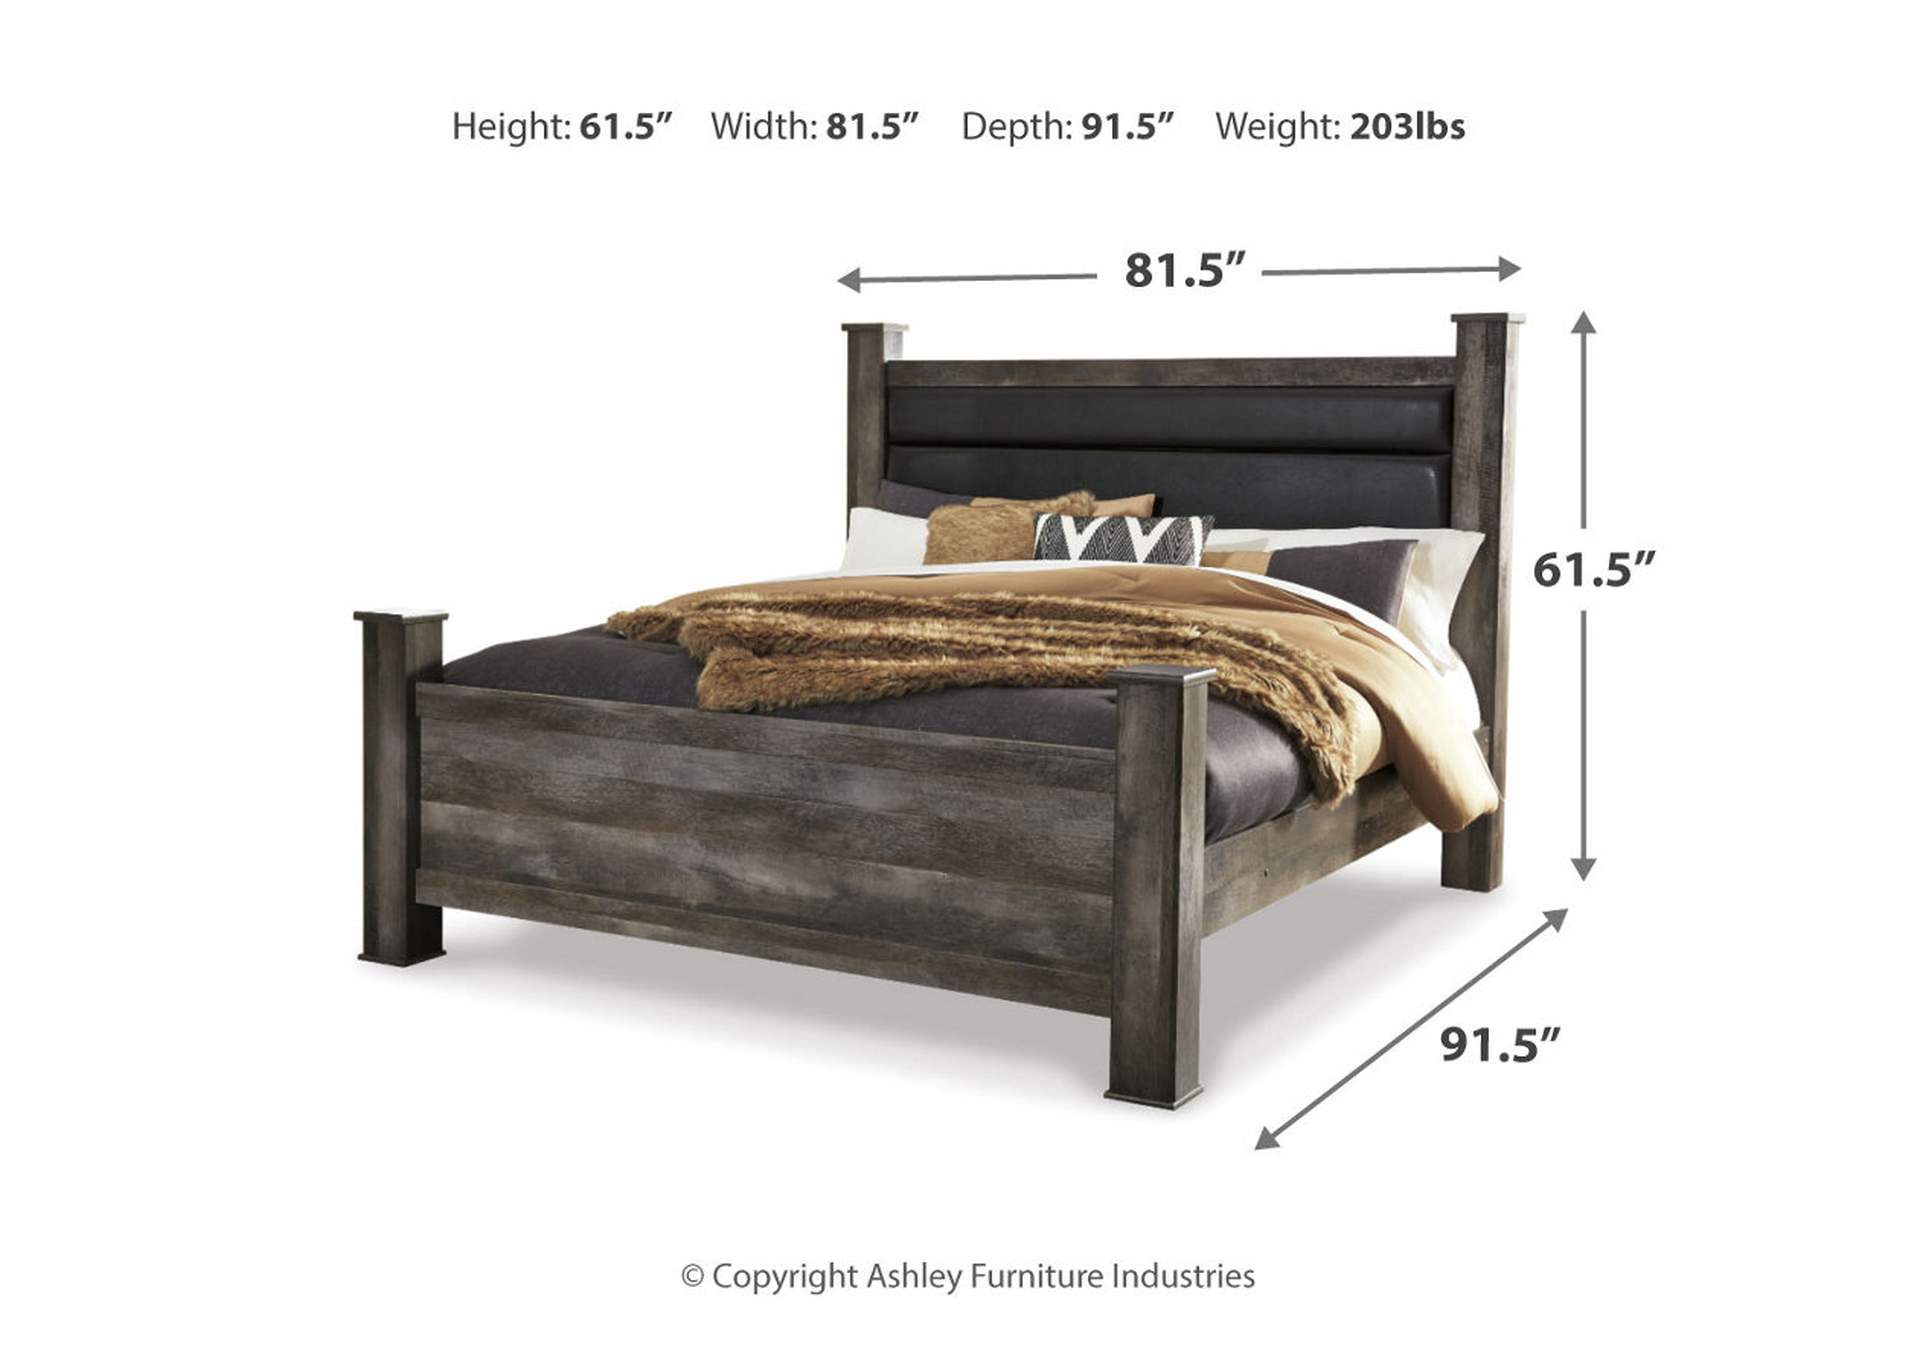 Wynnlow King Poster Bed, Dresser, Mirror and 2 Nightstands,Signature Design By Ashley